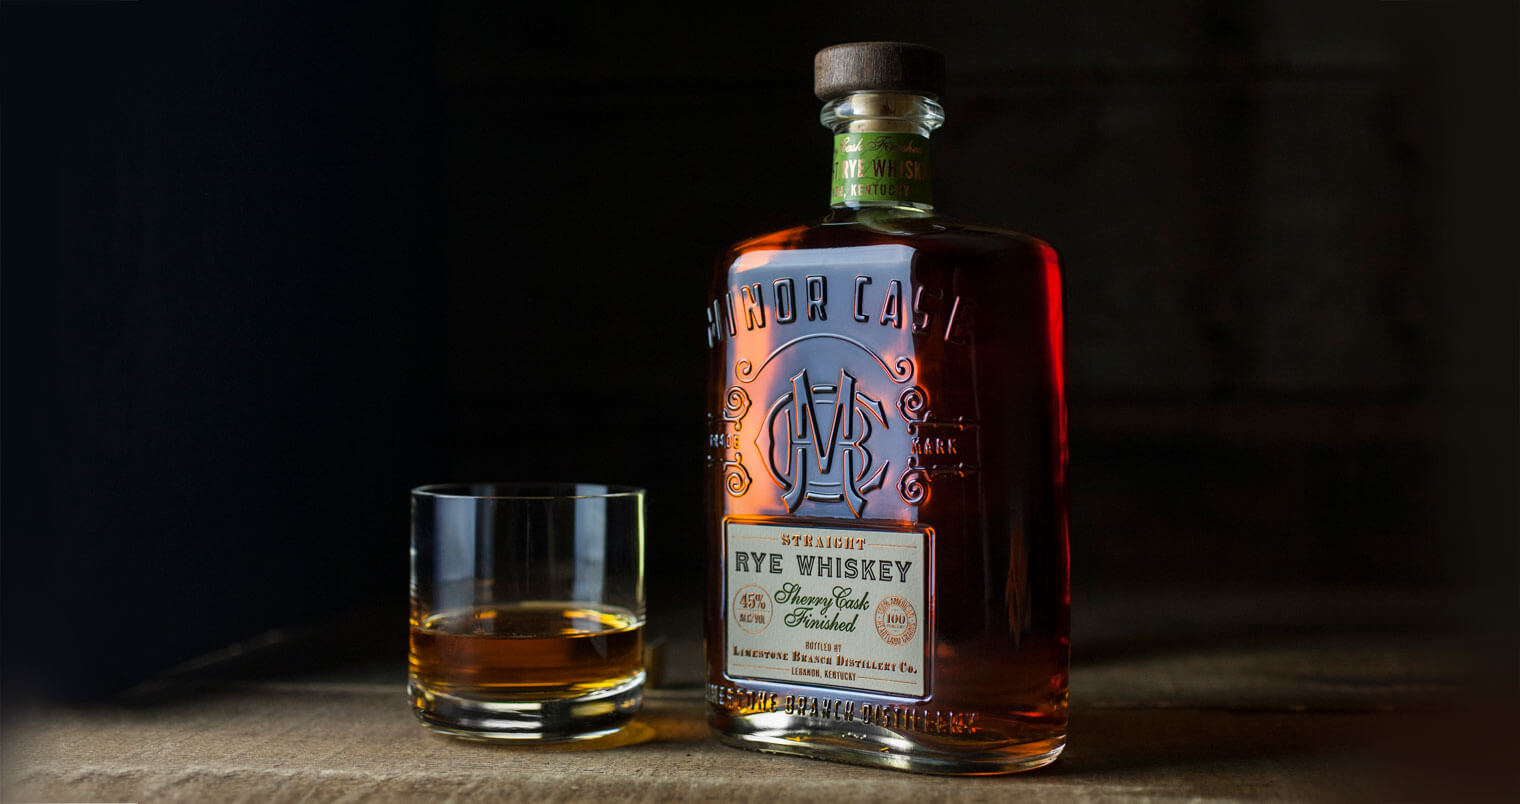 Limestone Branch Distillery Launches Minor Case Straight Rye Whiskey, featured image